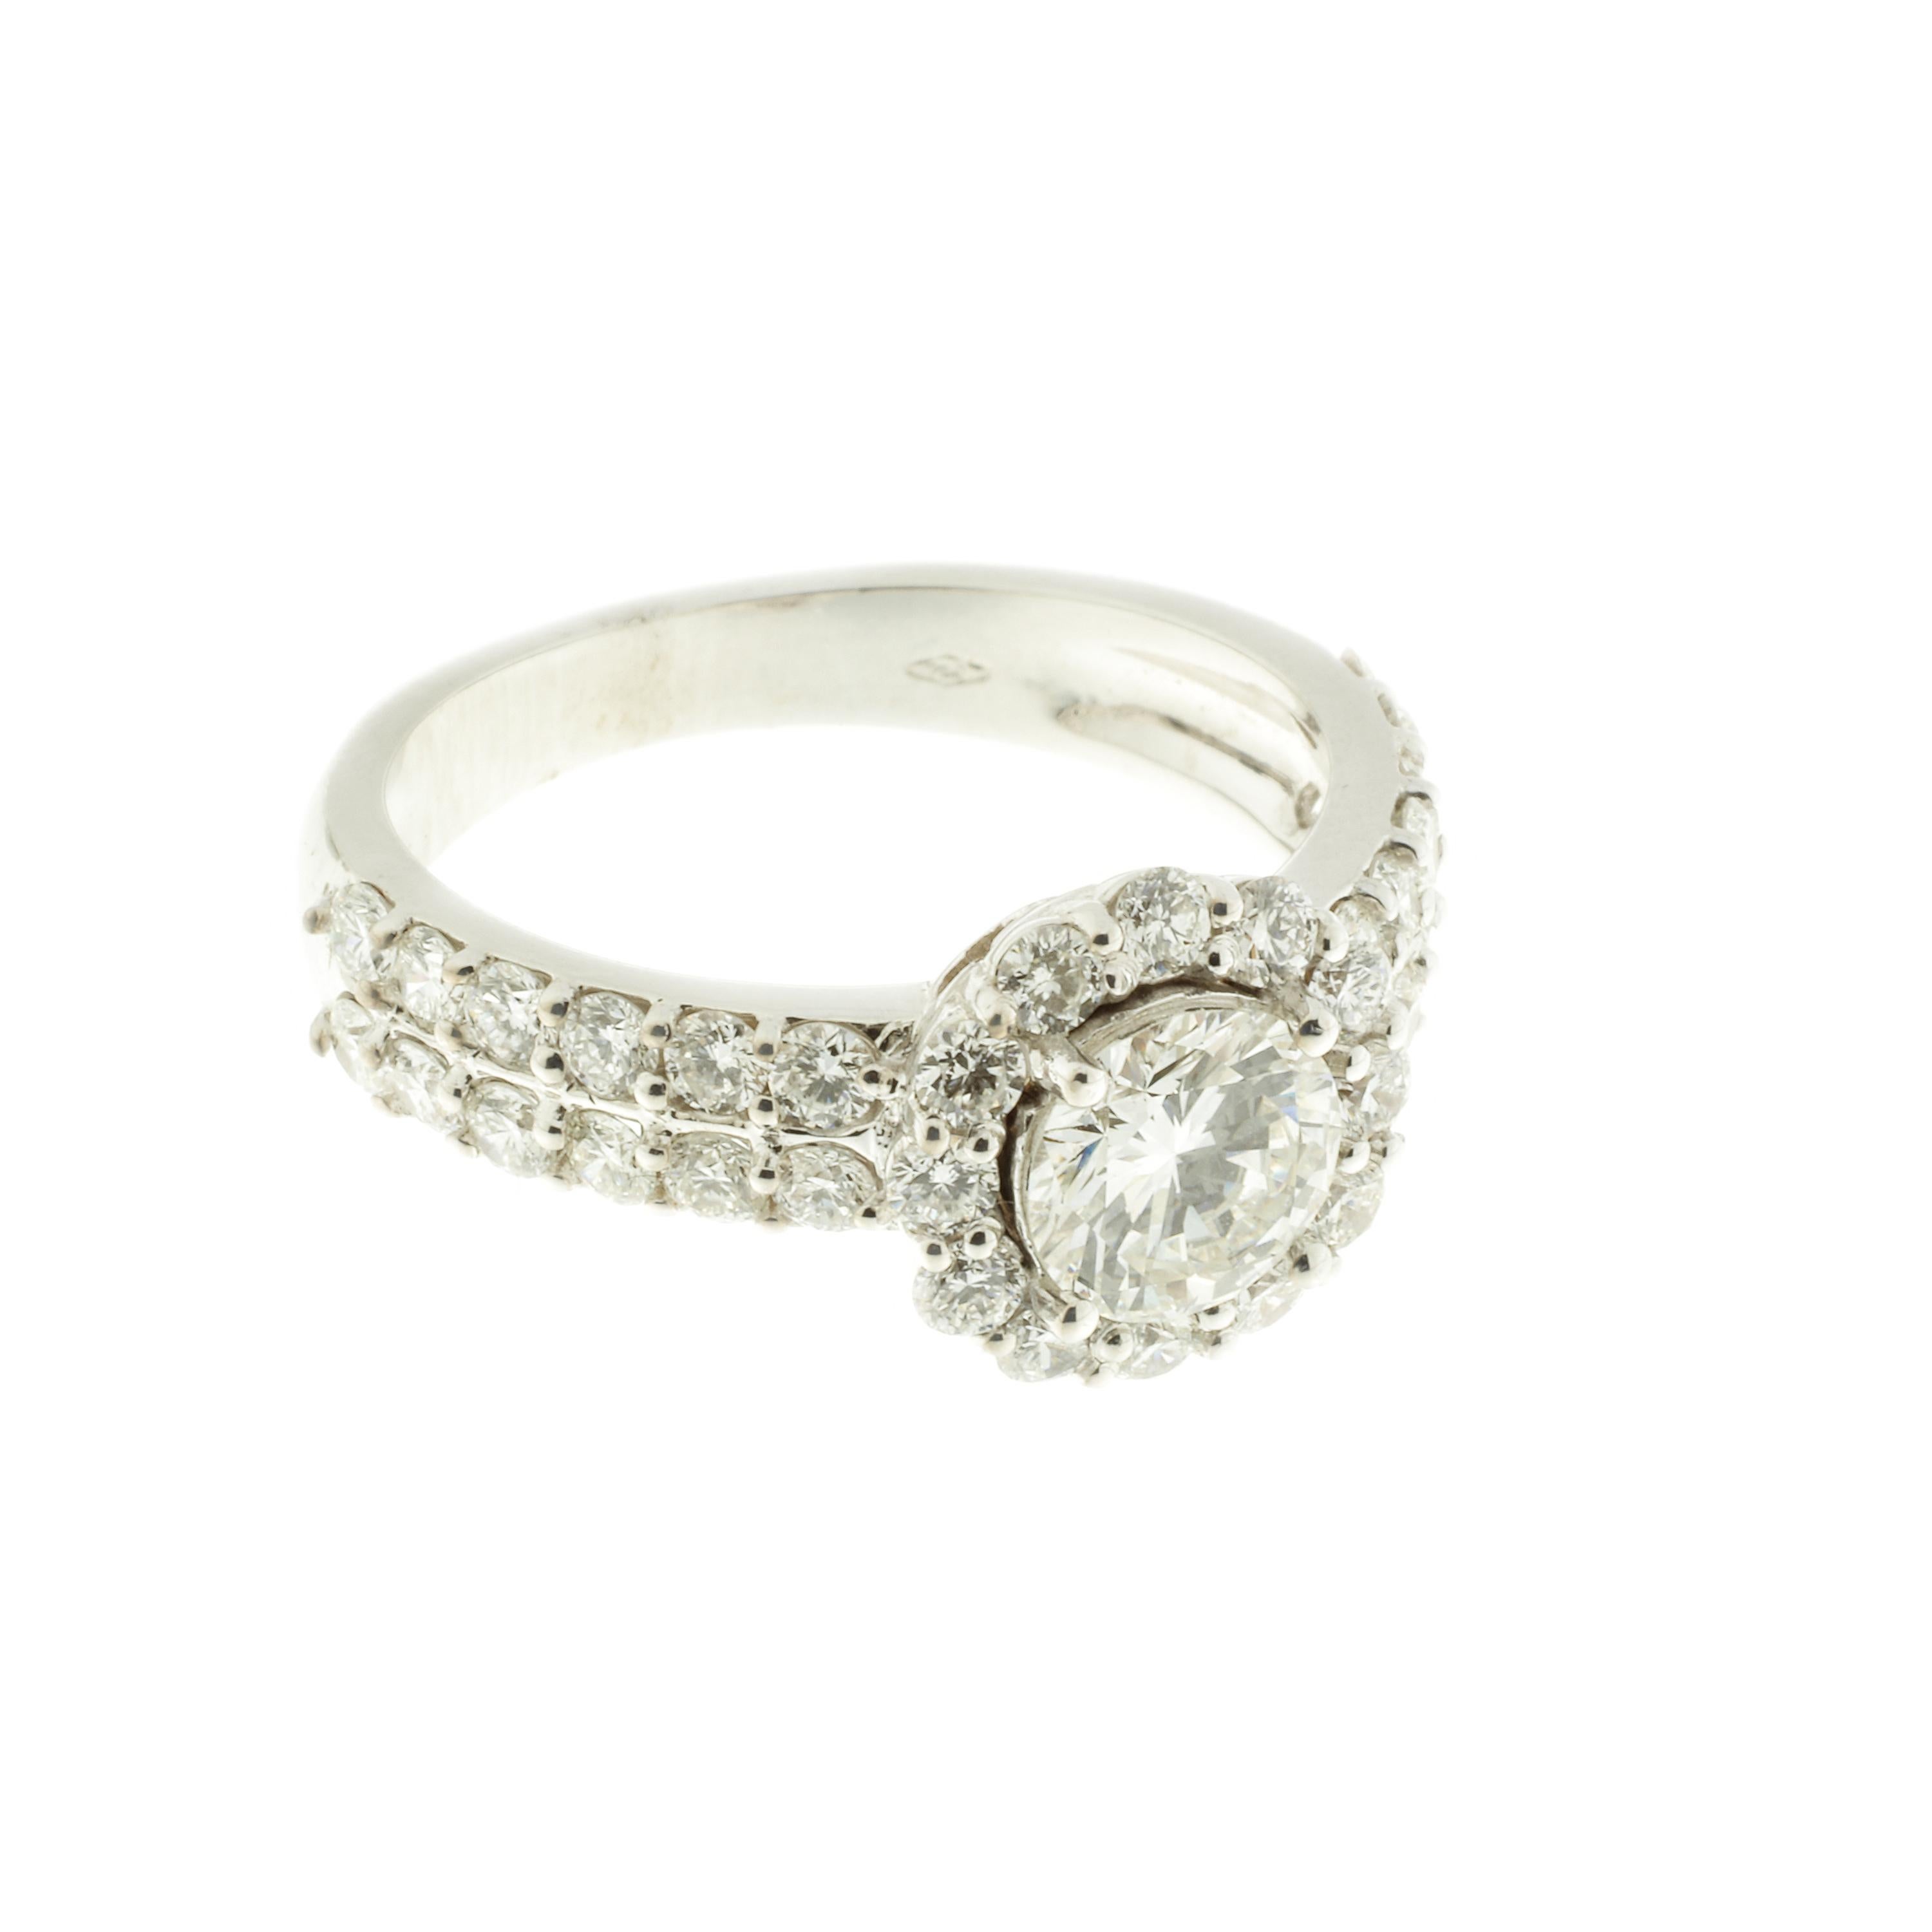 A central brilliant-cut diamond with a halo and a double row of lateral diamonds total 2.17 carats. This knock-out ring is timeless. The central diamond weighs 0.93-carats and all the stones are rated G VS. 

The photographed ring measures 7.25